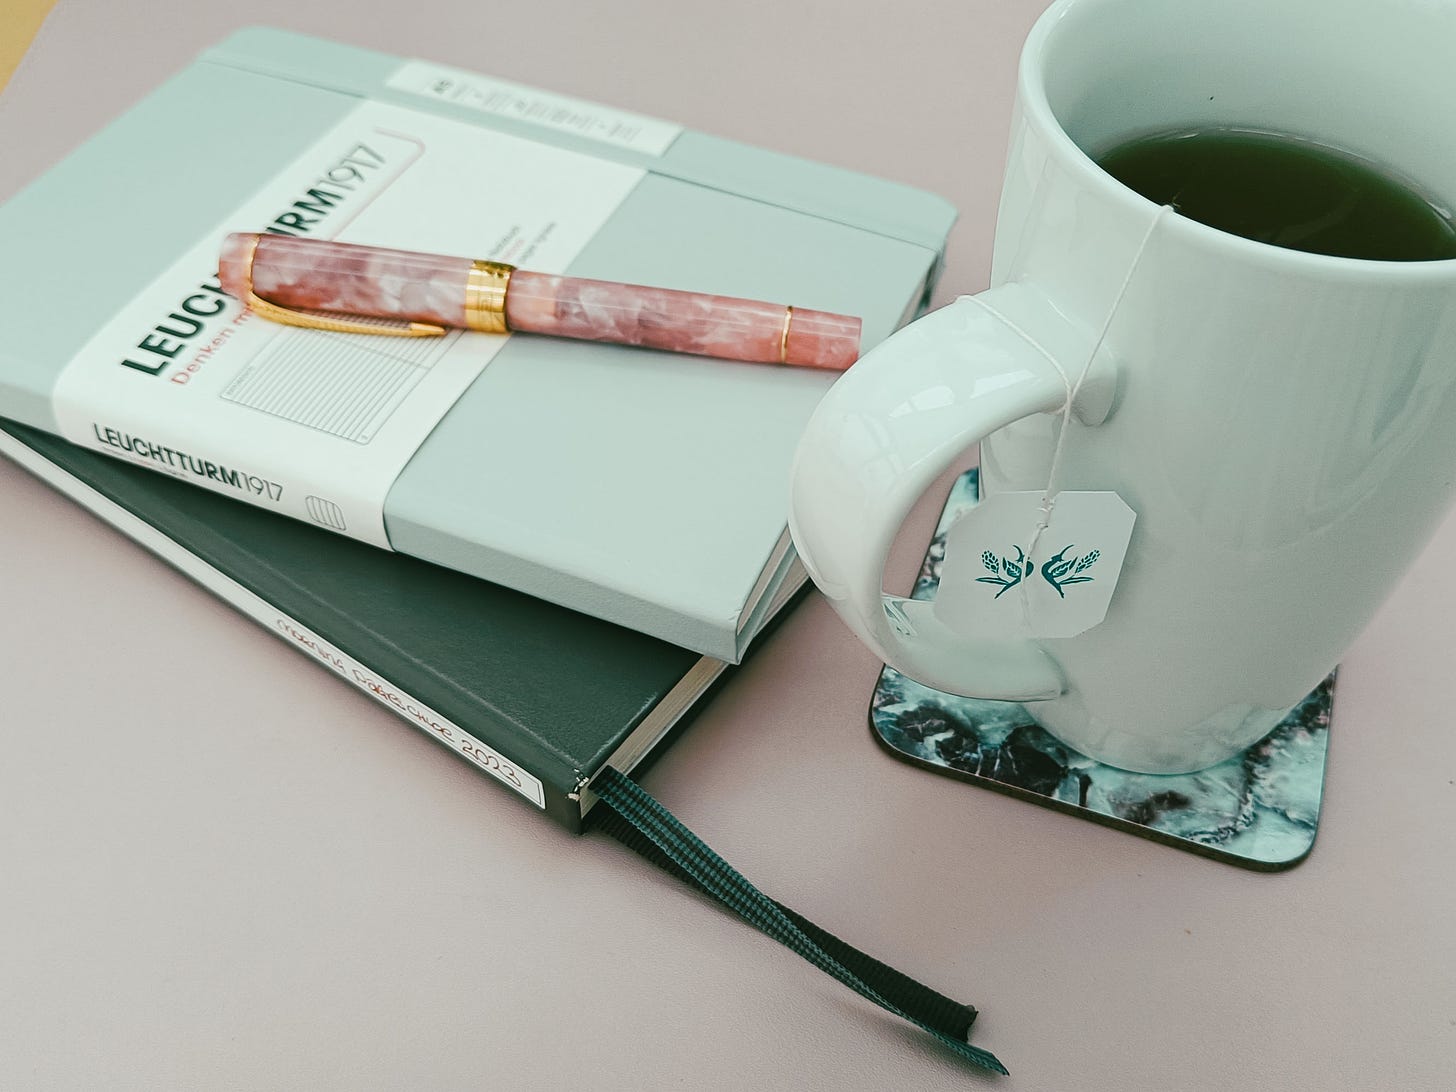 Img: Stack of 2 A5 Leuchtturm1917 journals with a pink and gold fountain pen on top, plus a tall white mug of herbal tea.